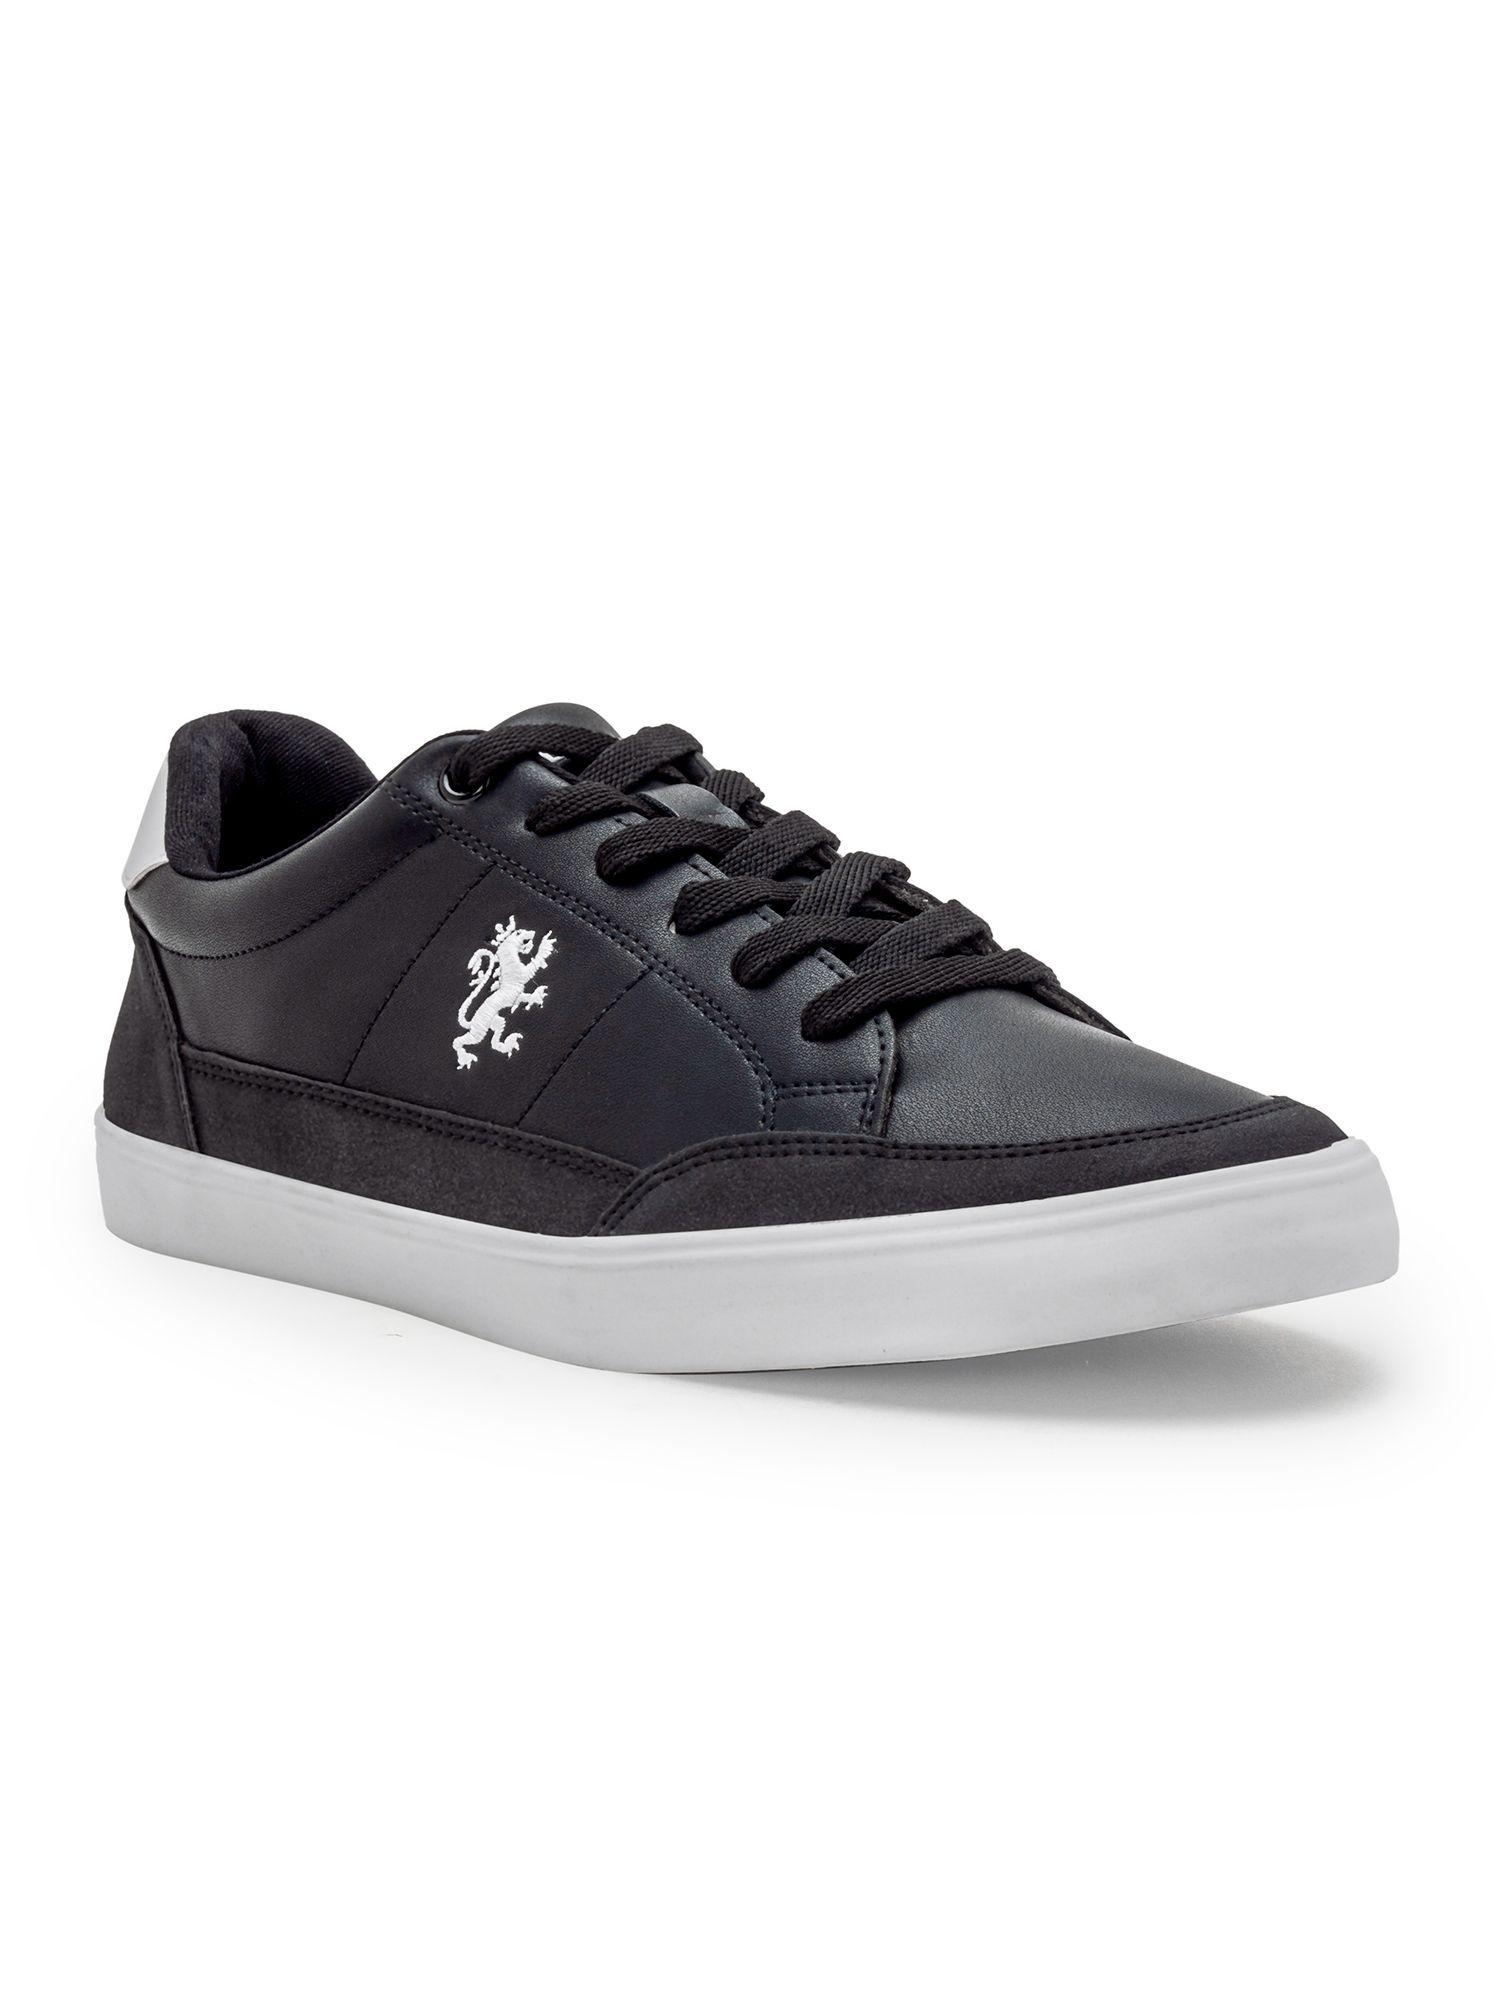 mens solid black white sneakers